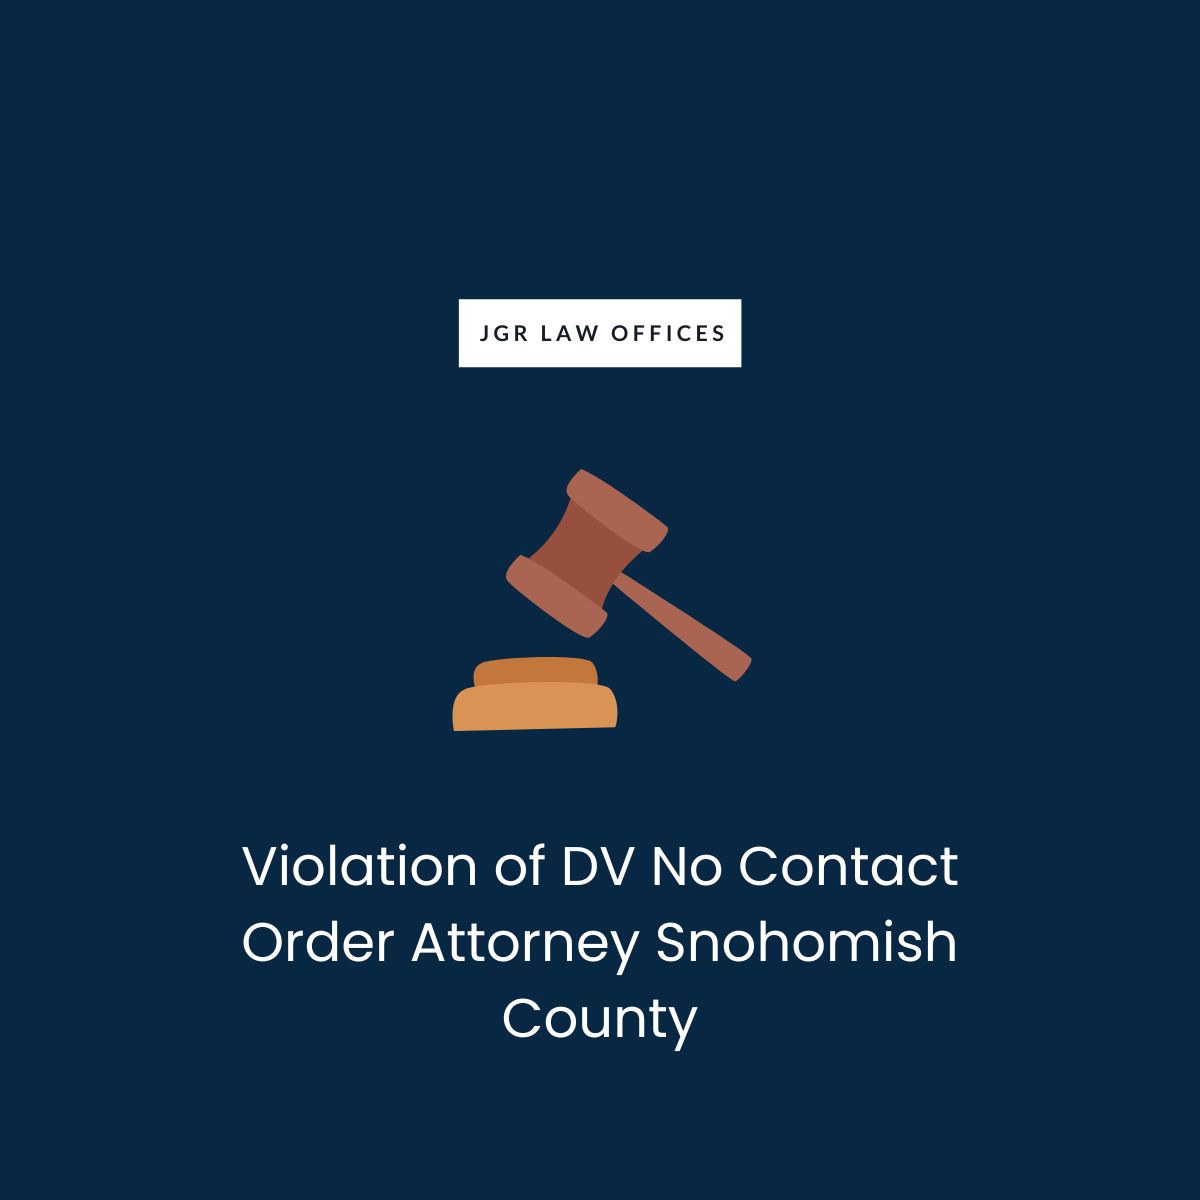 Violation of DV No Contact Order Attorney Snohomish County